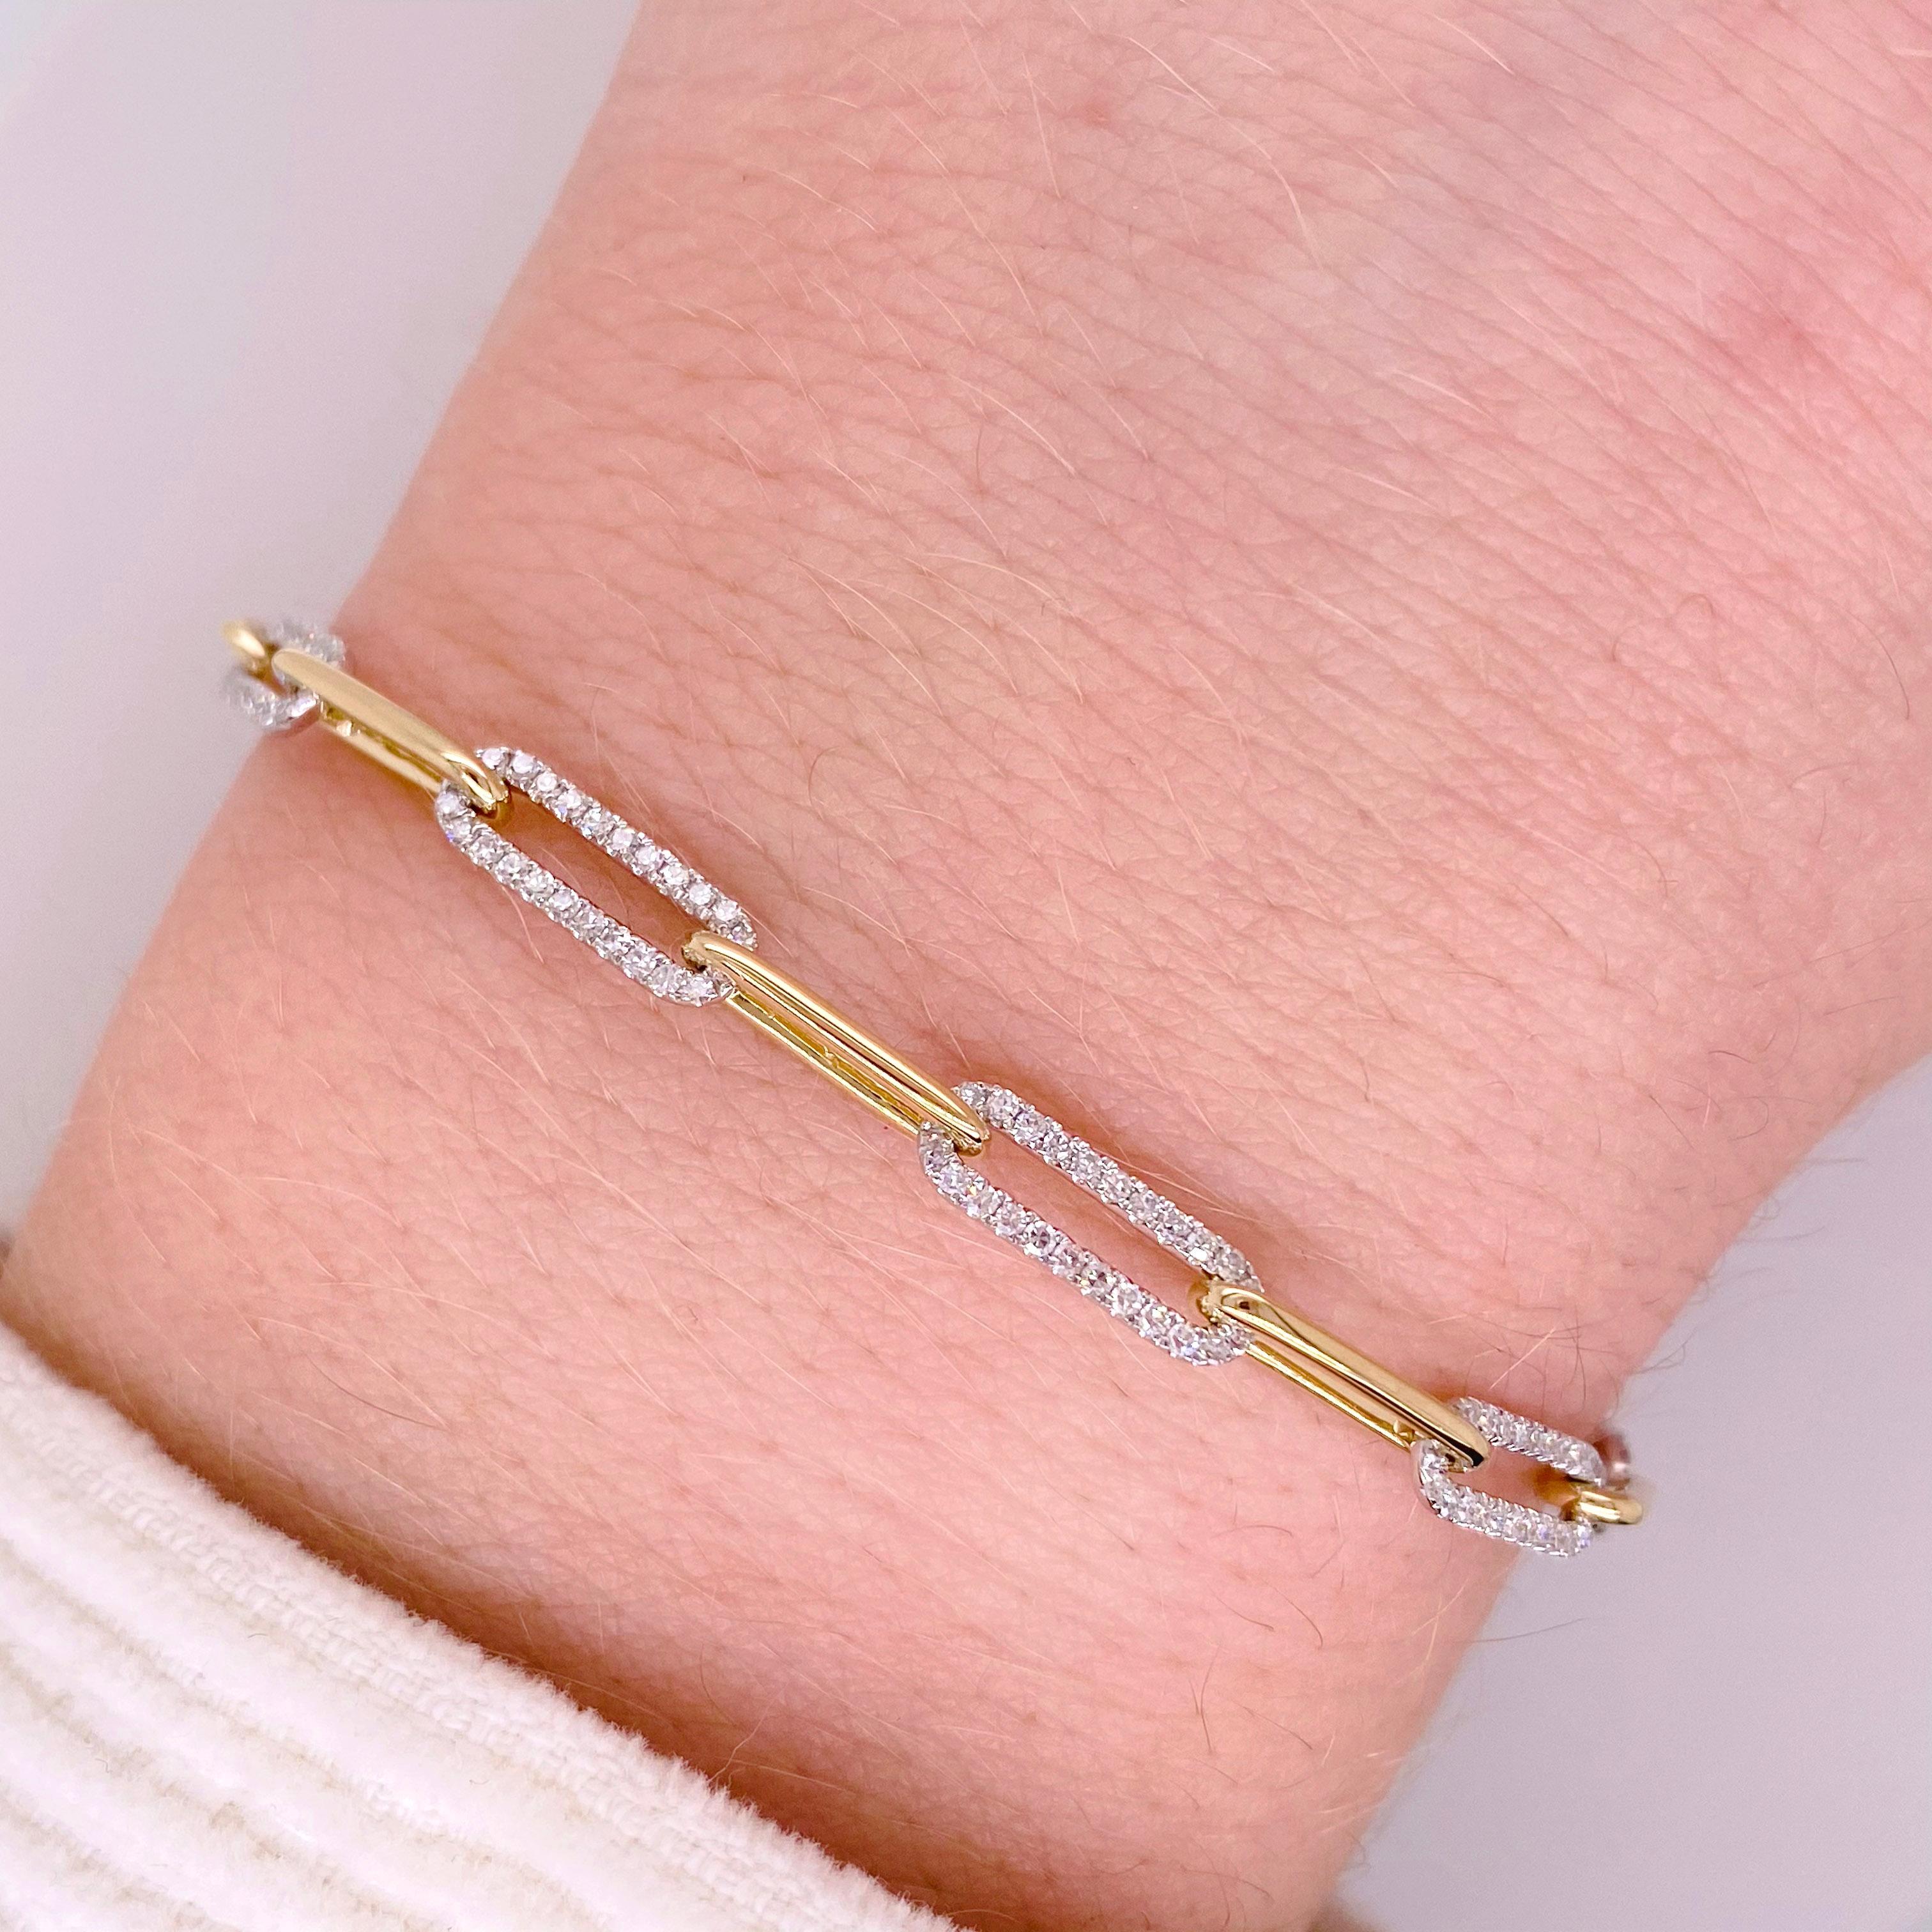 This gorgeous bracelet has diamonds on every other link and there are 206 full cut brilliant diamonds!  The woman’s bracelet is exceptionally attractive with sparkle from every angle. The bracelet is made from 14 karat yellow and 14 karat white gold